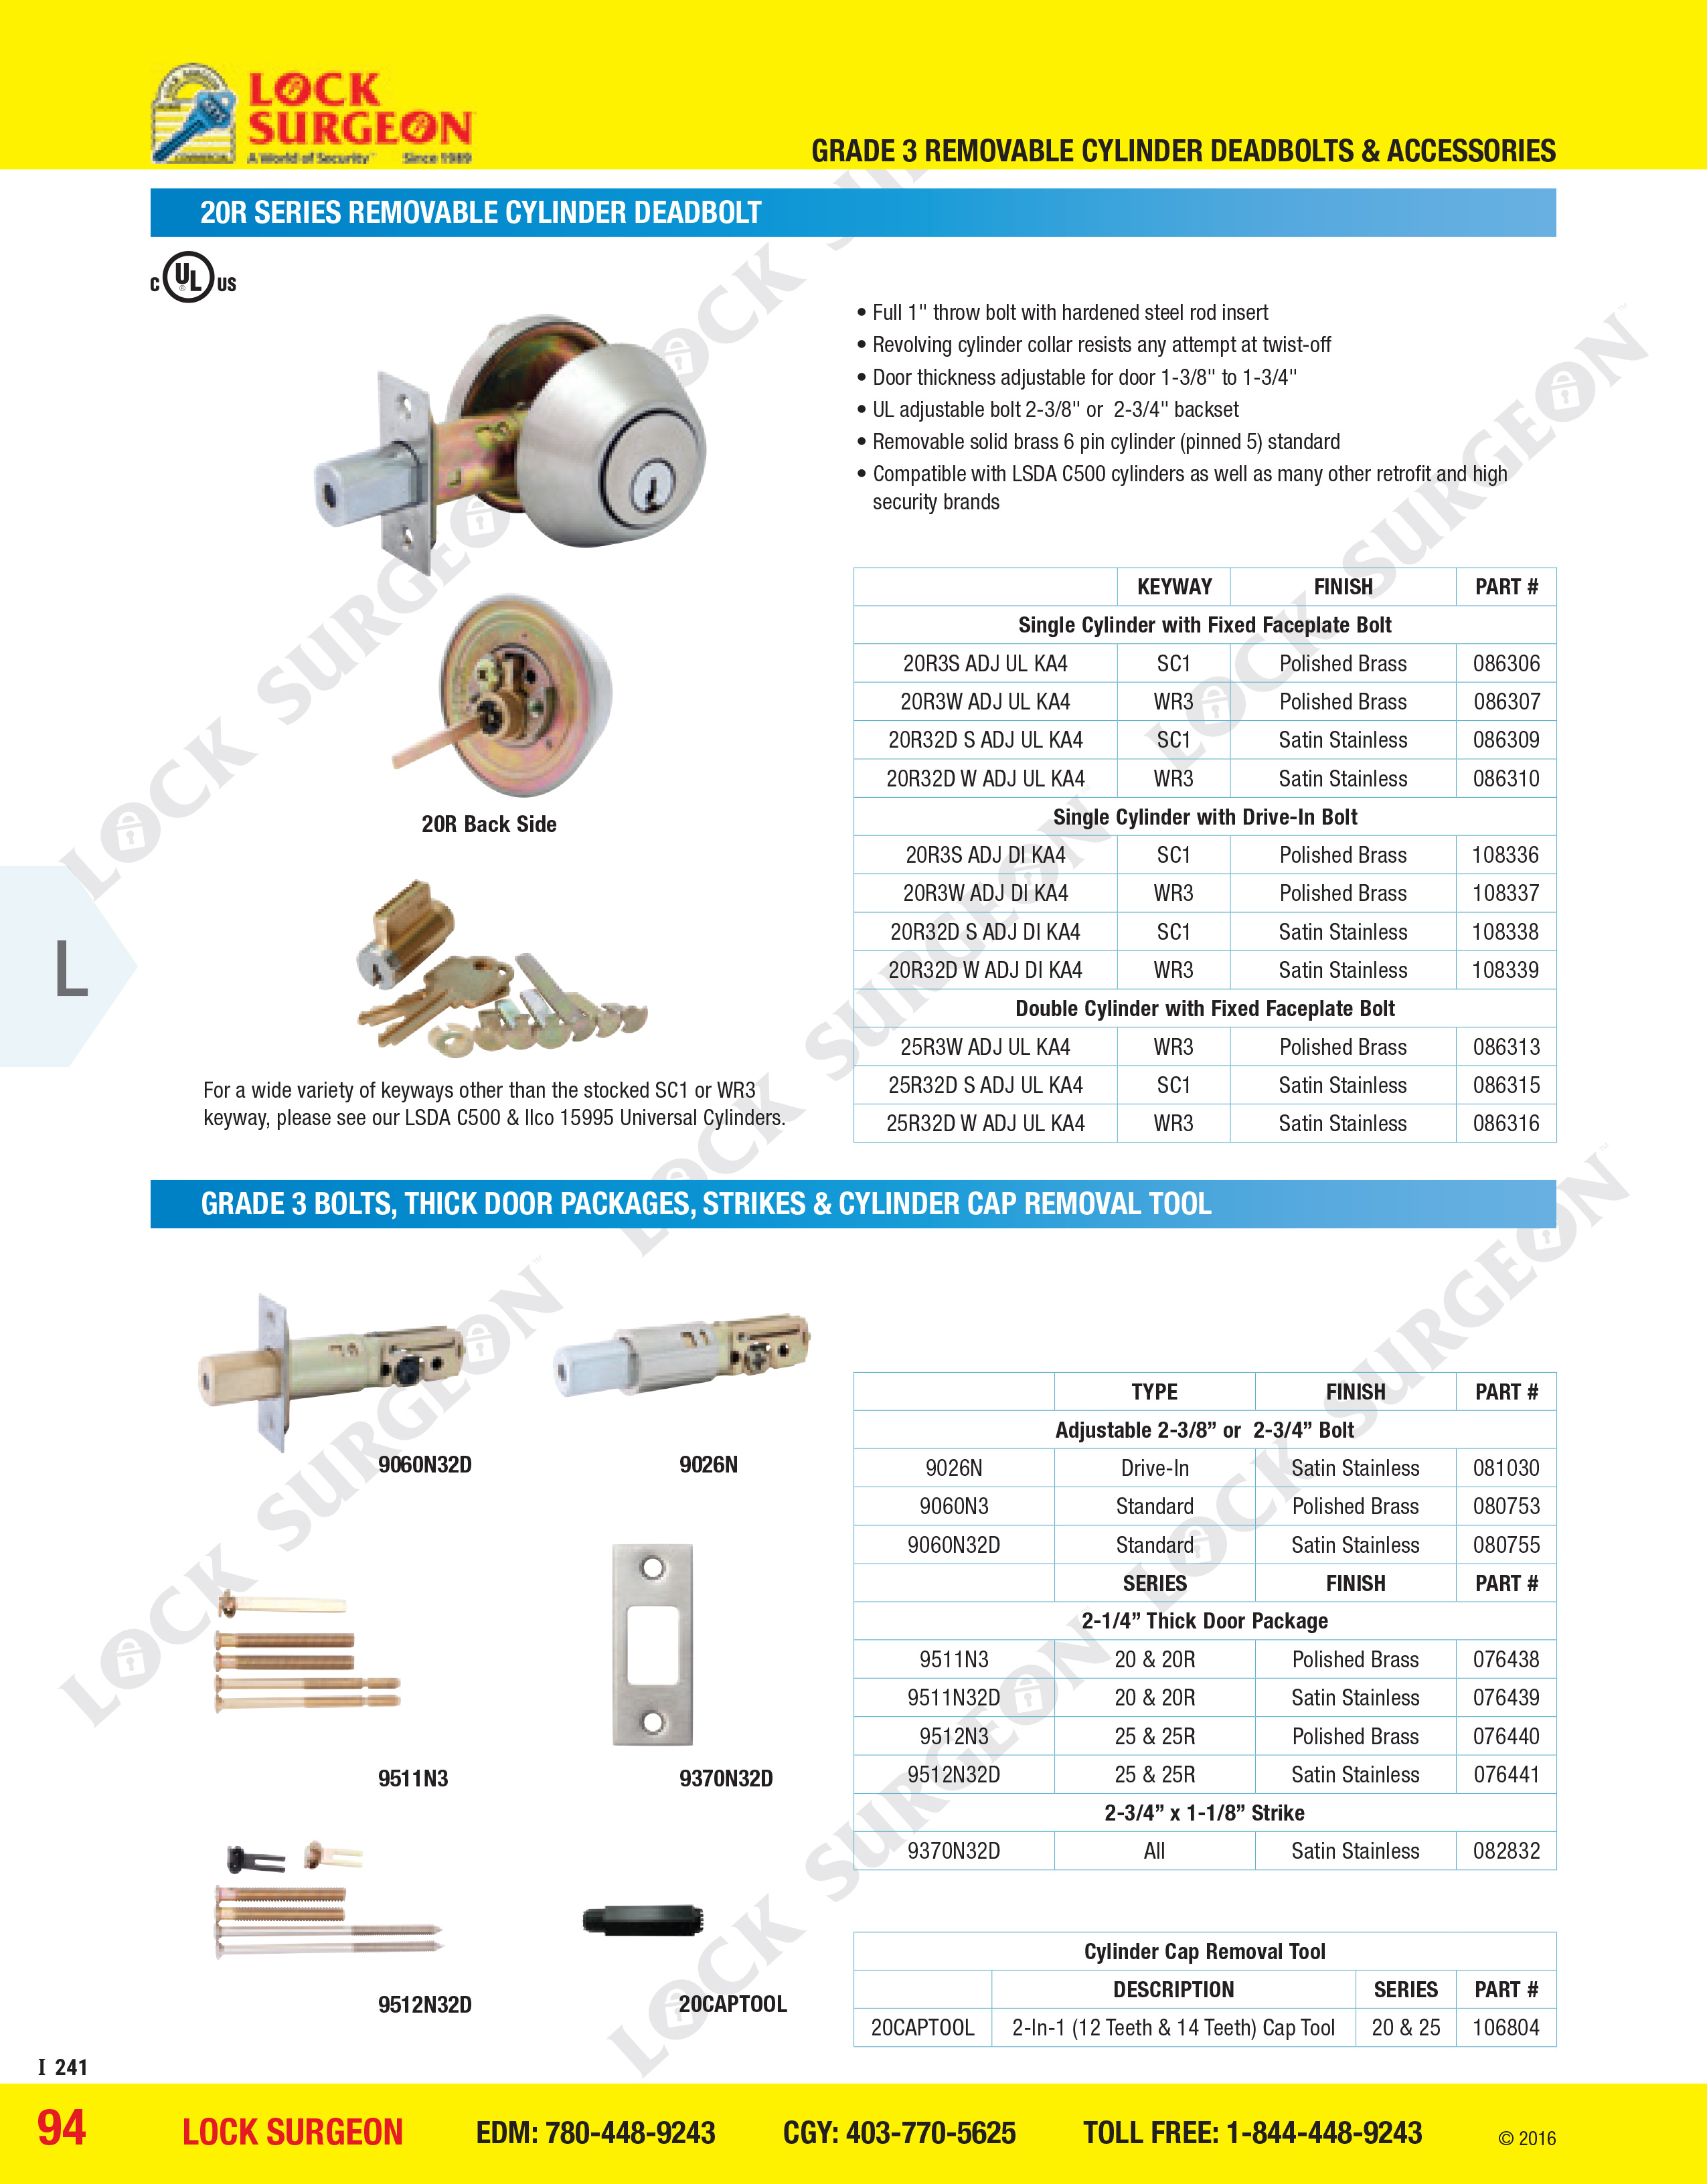 Quality deadbolt and superior locking one inch throw bolt, hardware kit will fit 2-1/4 door package.